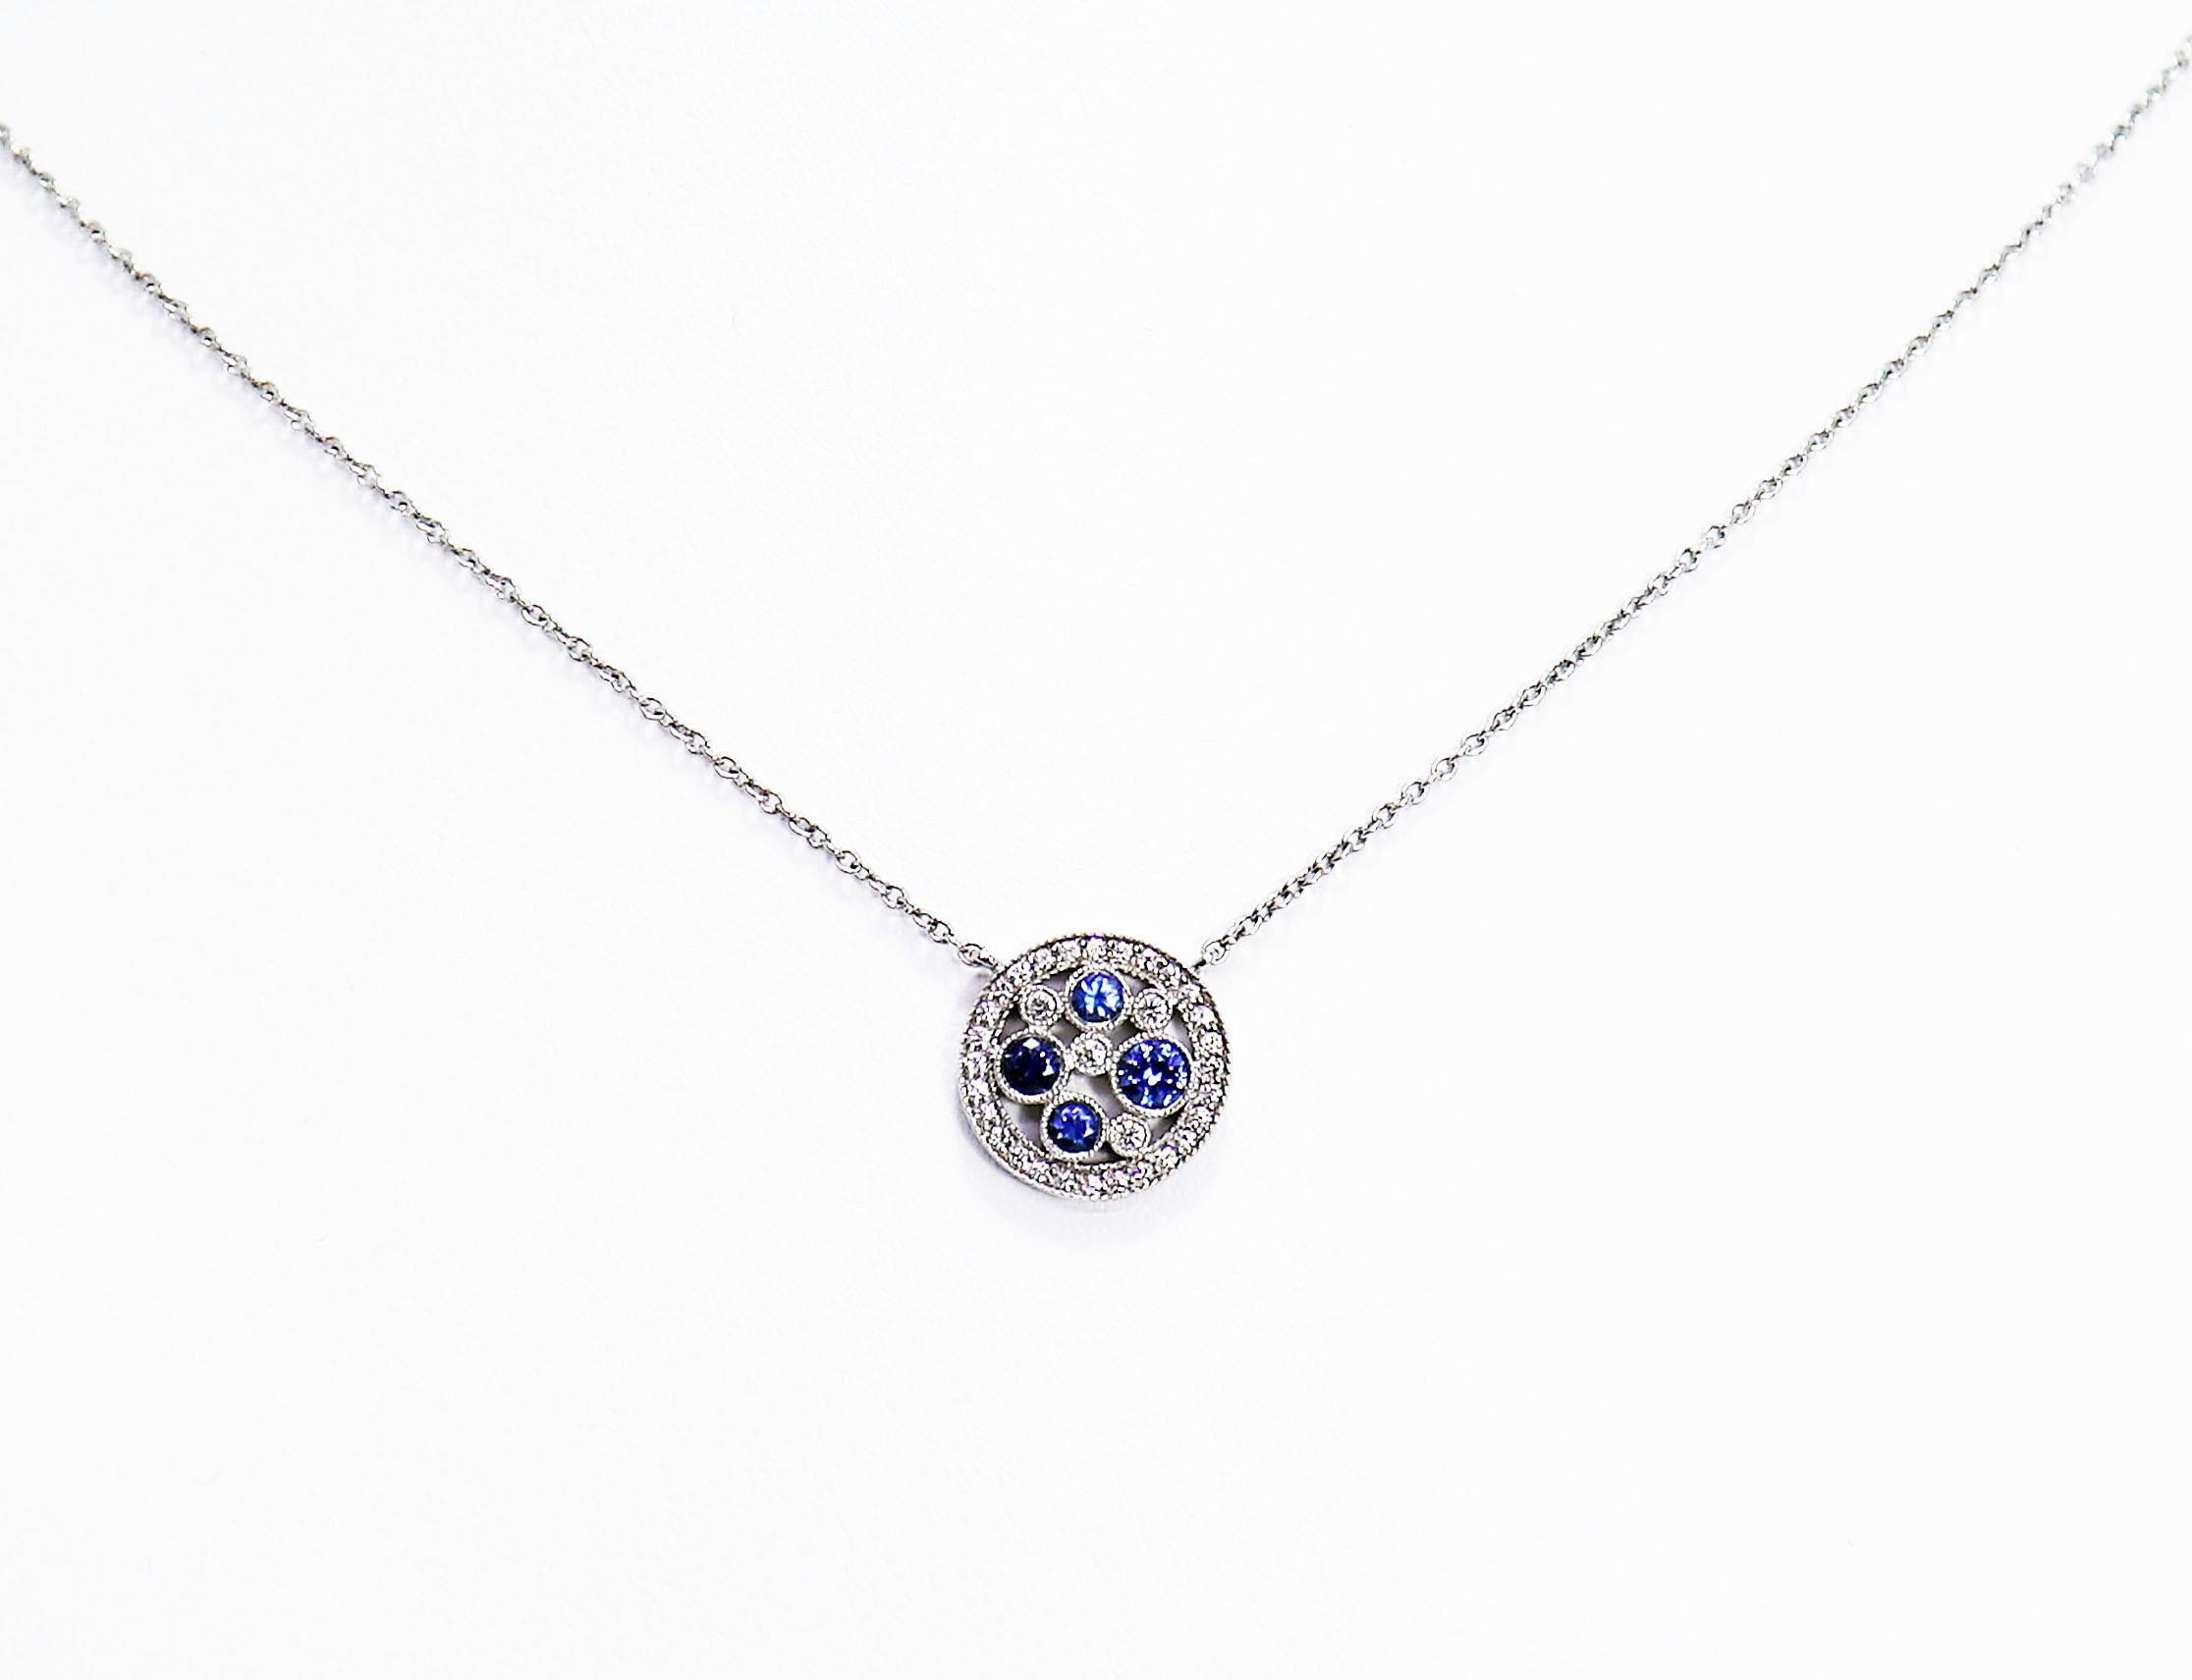 Tiffany & Co.'s Montana Sapphire Pendant from their Cobblestone Collection features four round blue sapphires and four round brilliant cut diamonds openly mounted in a rubover setting with a millgrain edge.  These stones are beautifully set in the